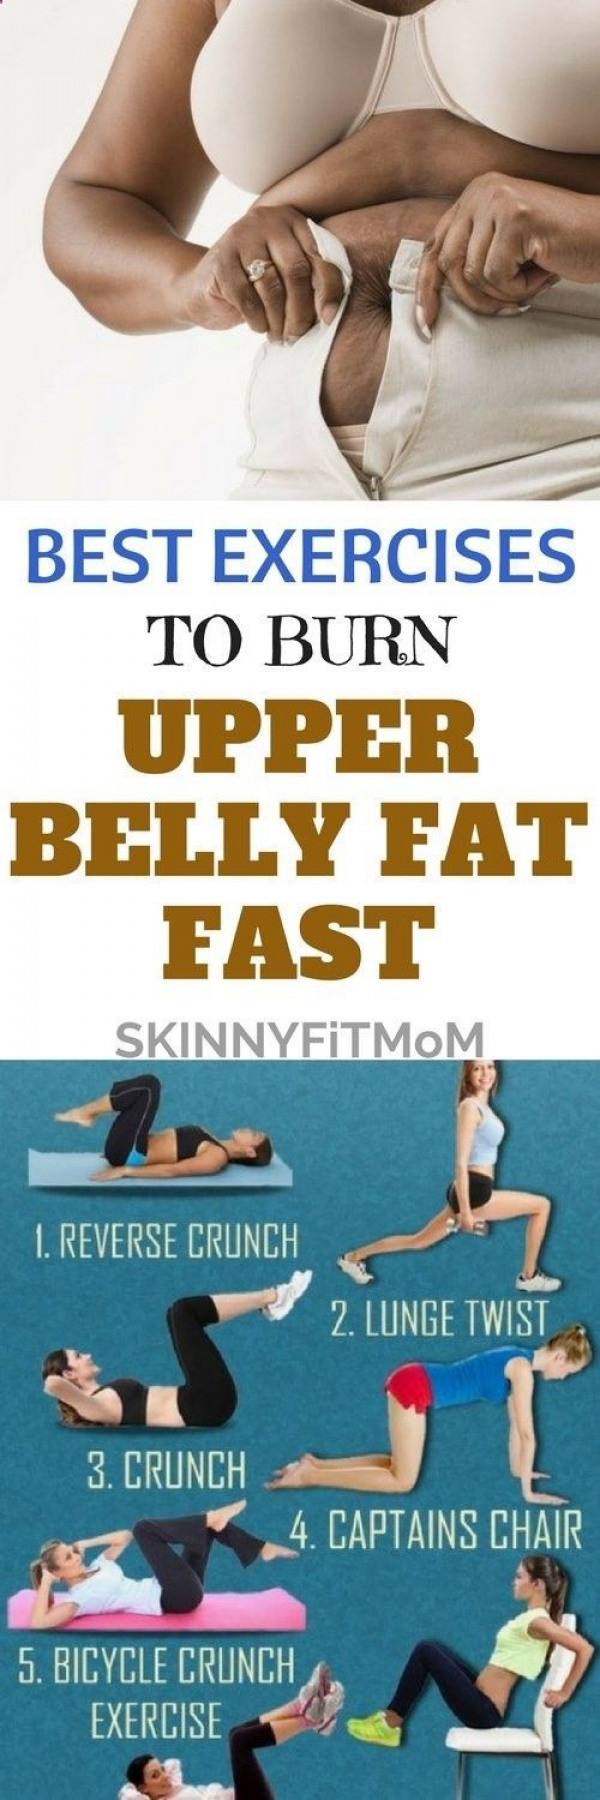 Excersise To Burn Belly Fat
 Best Exercises To Burn Upper Belly Fat Fast – Simple Ways